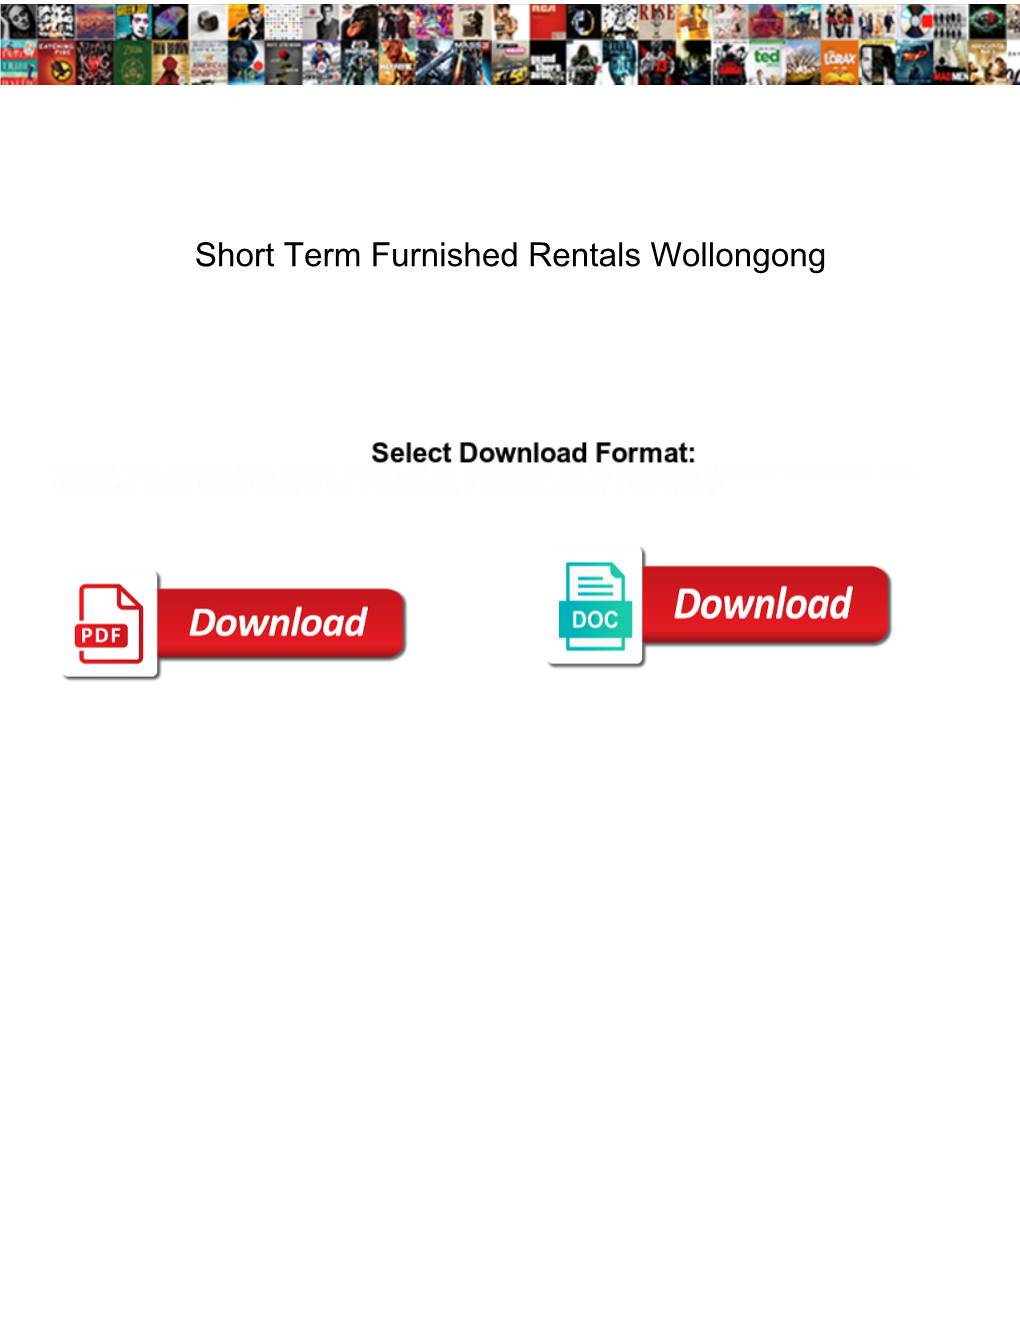 Short Term Furnished Rentals Wollongong